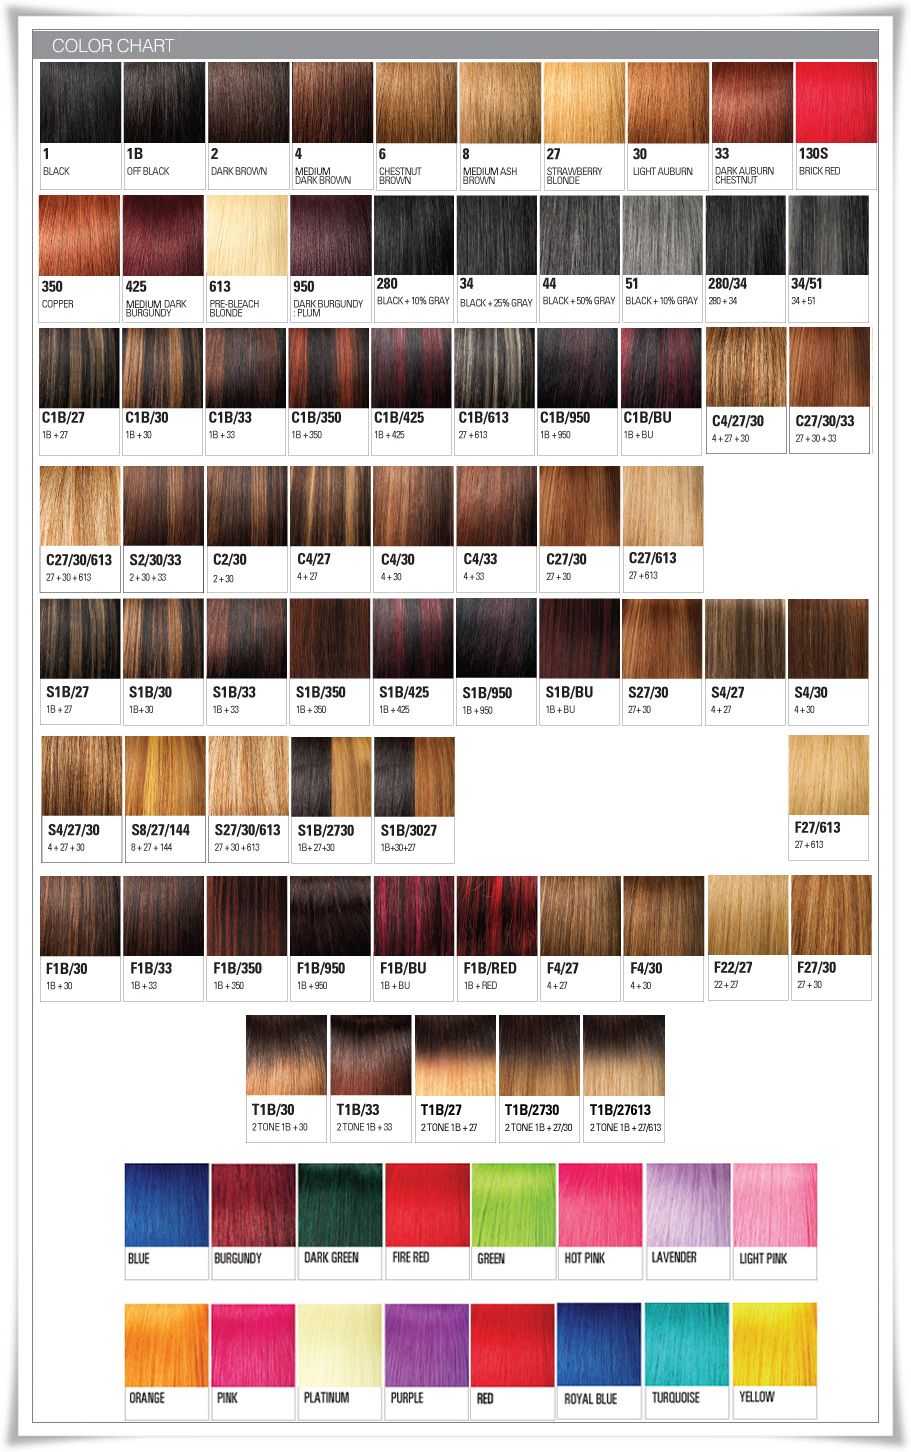 How to read Hair Color Chart?